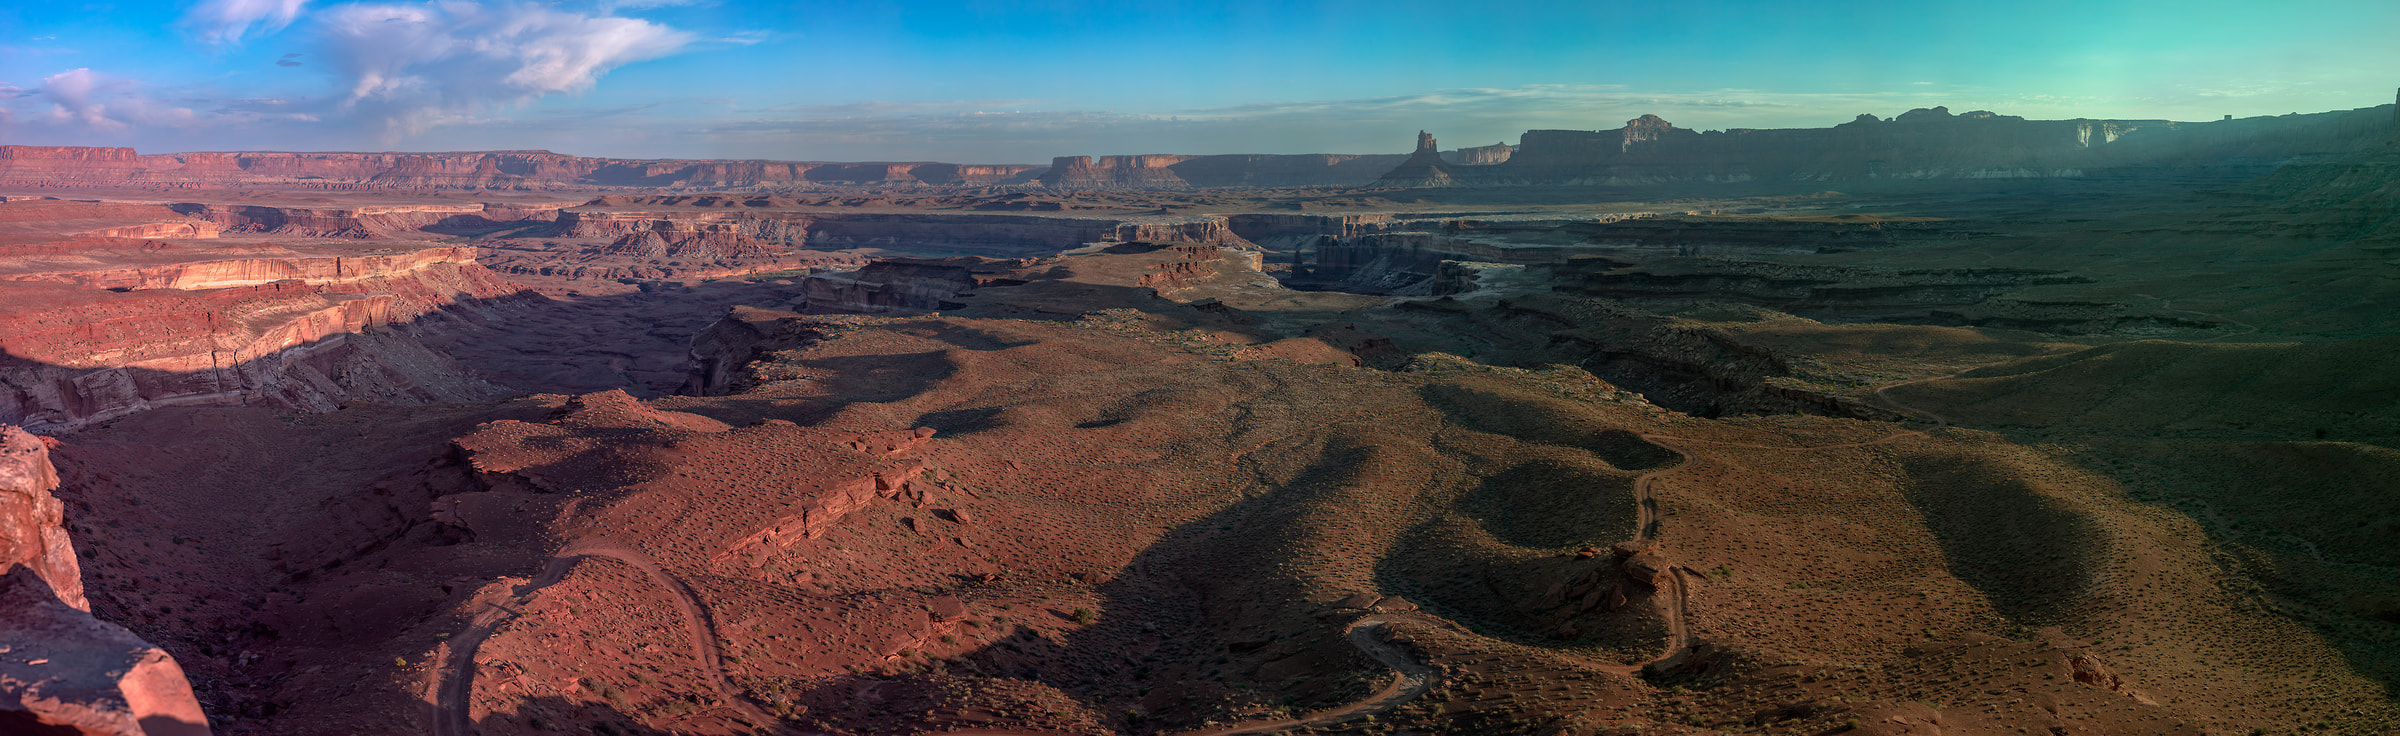 3,722 megapixels! A very high resolution panorama photo of Canyonlands National Park; landscape photograph created by John Freeman in Murphy Hogsback, White Rim Trail, Canyonlands National Park, Utah